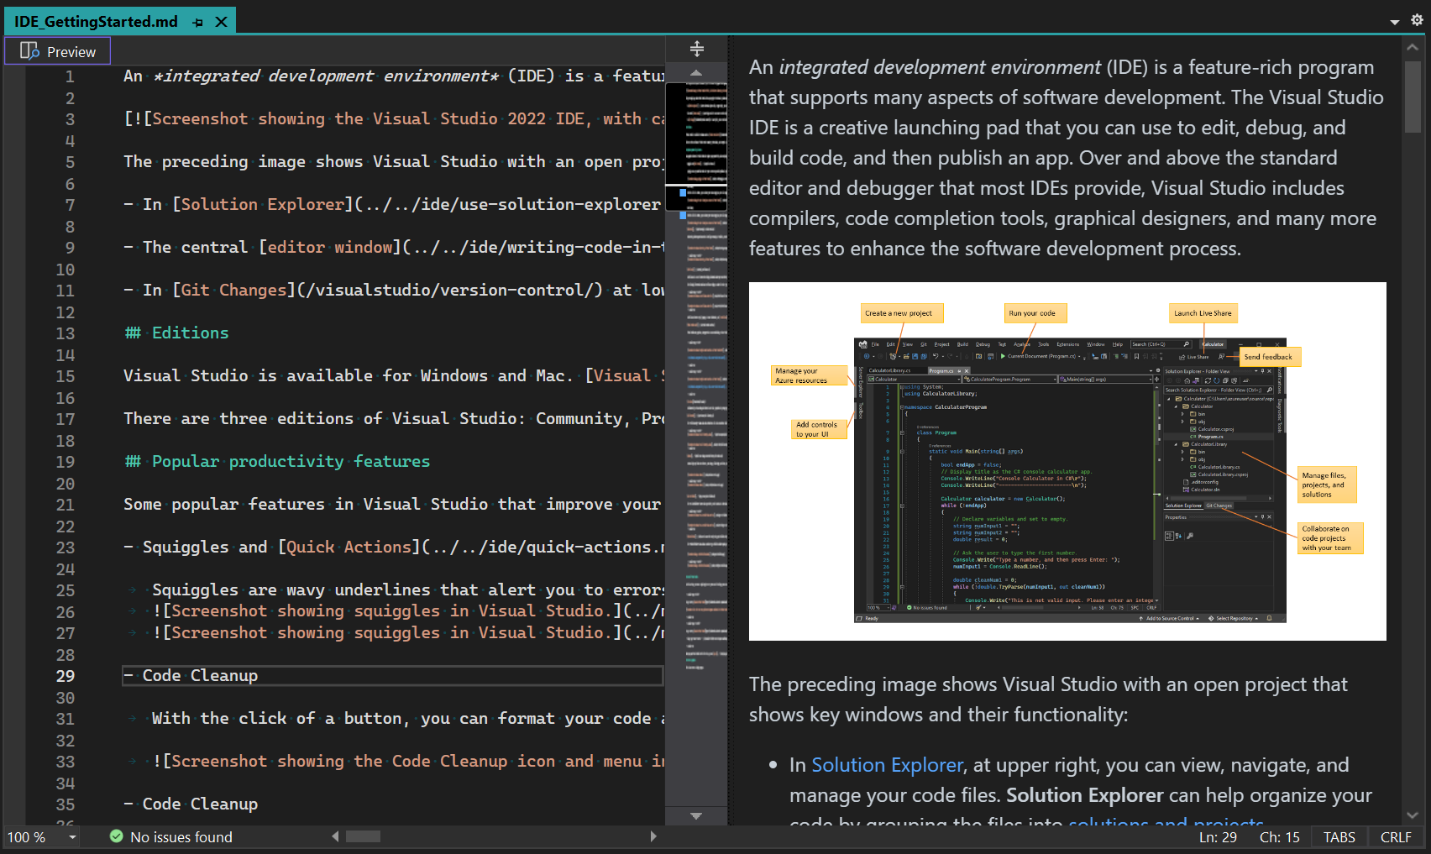 The markdown experience in Visual Studio, with the raw markdown displayed on the left and a preview of the rendered HTML displayed on the right.